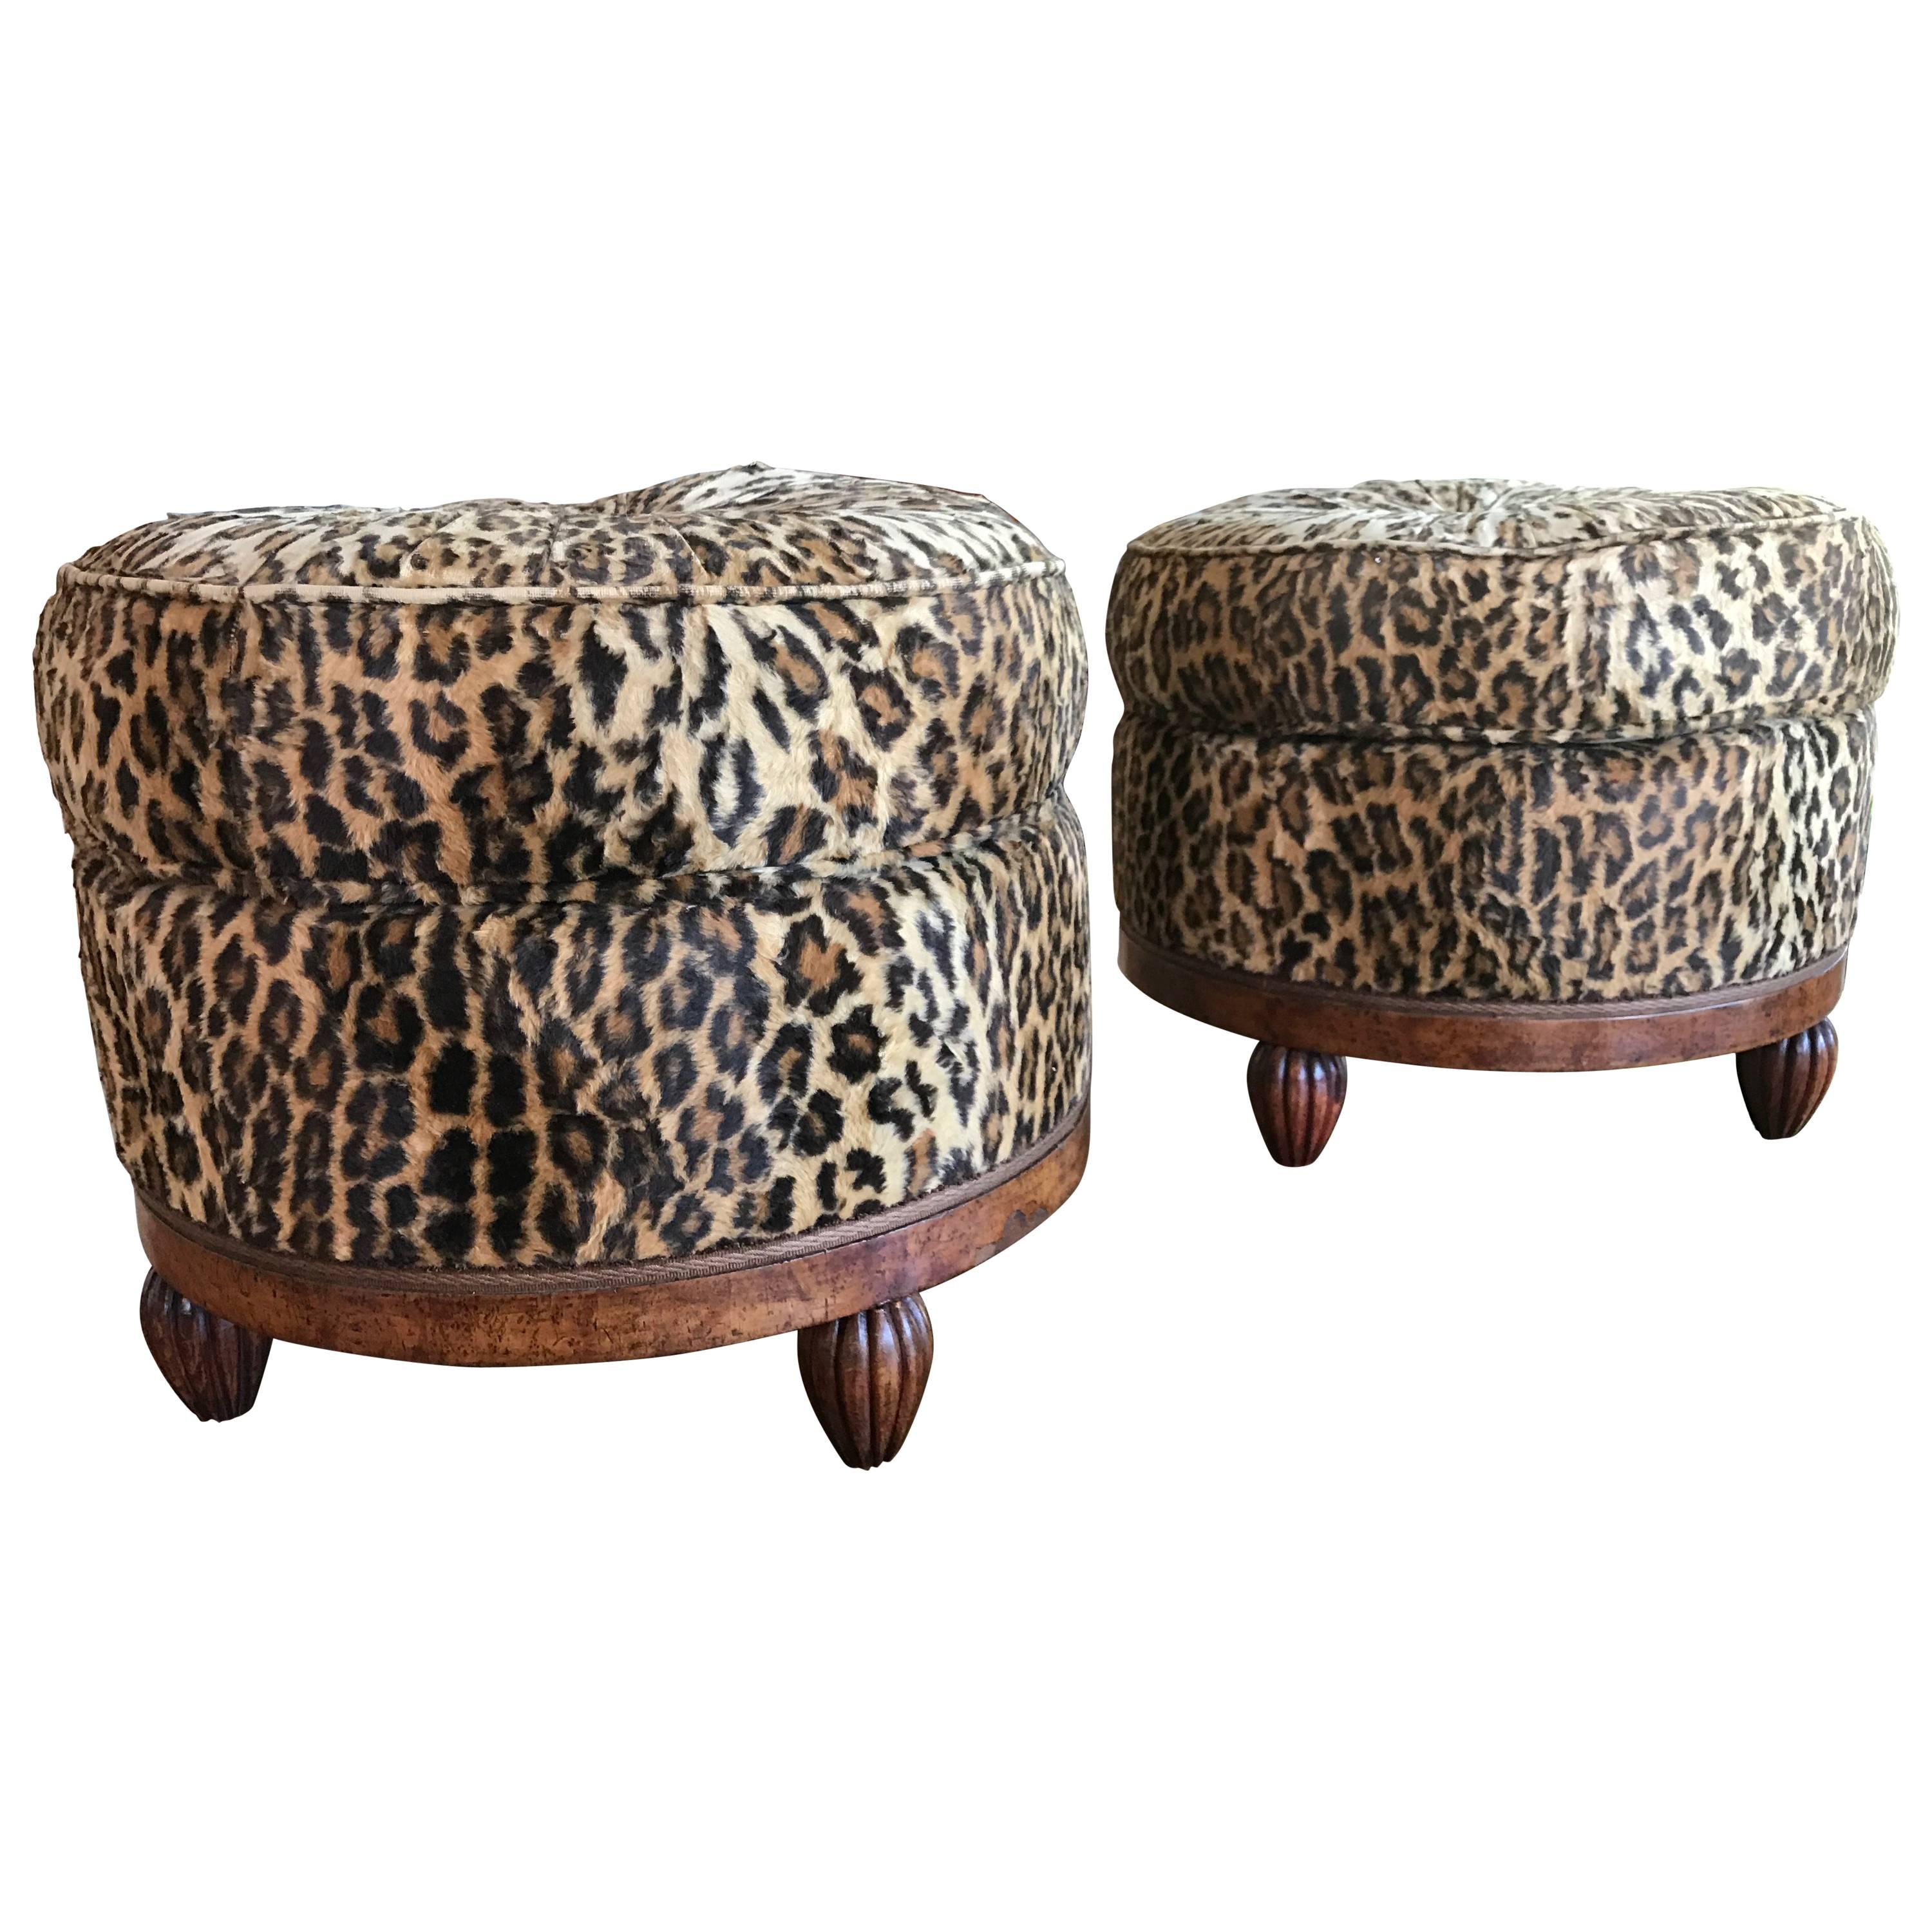 Pair of Mid-20th Century Burr Walnut French Pouffes For Sale